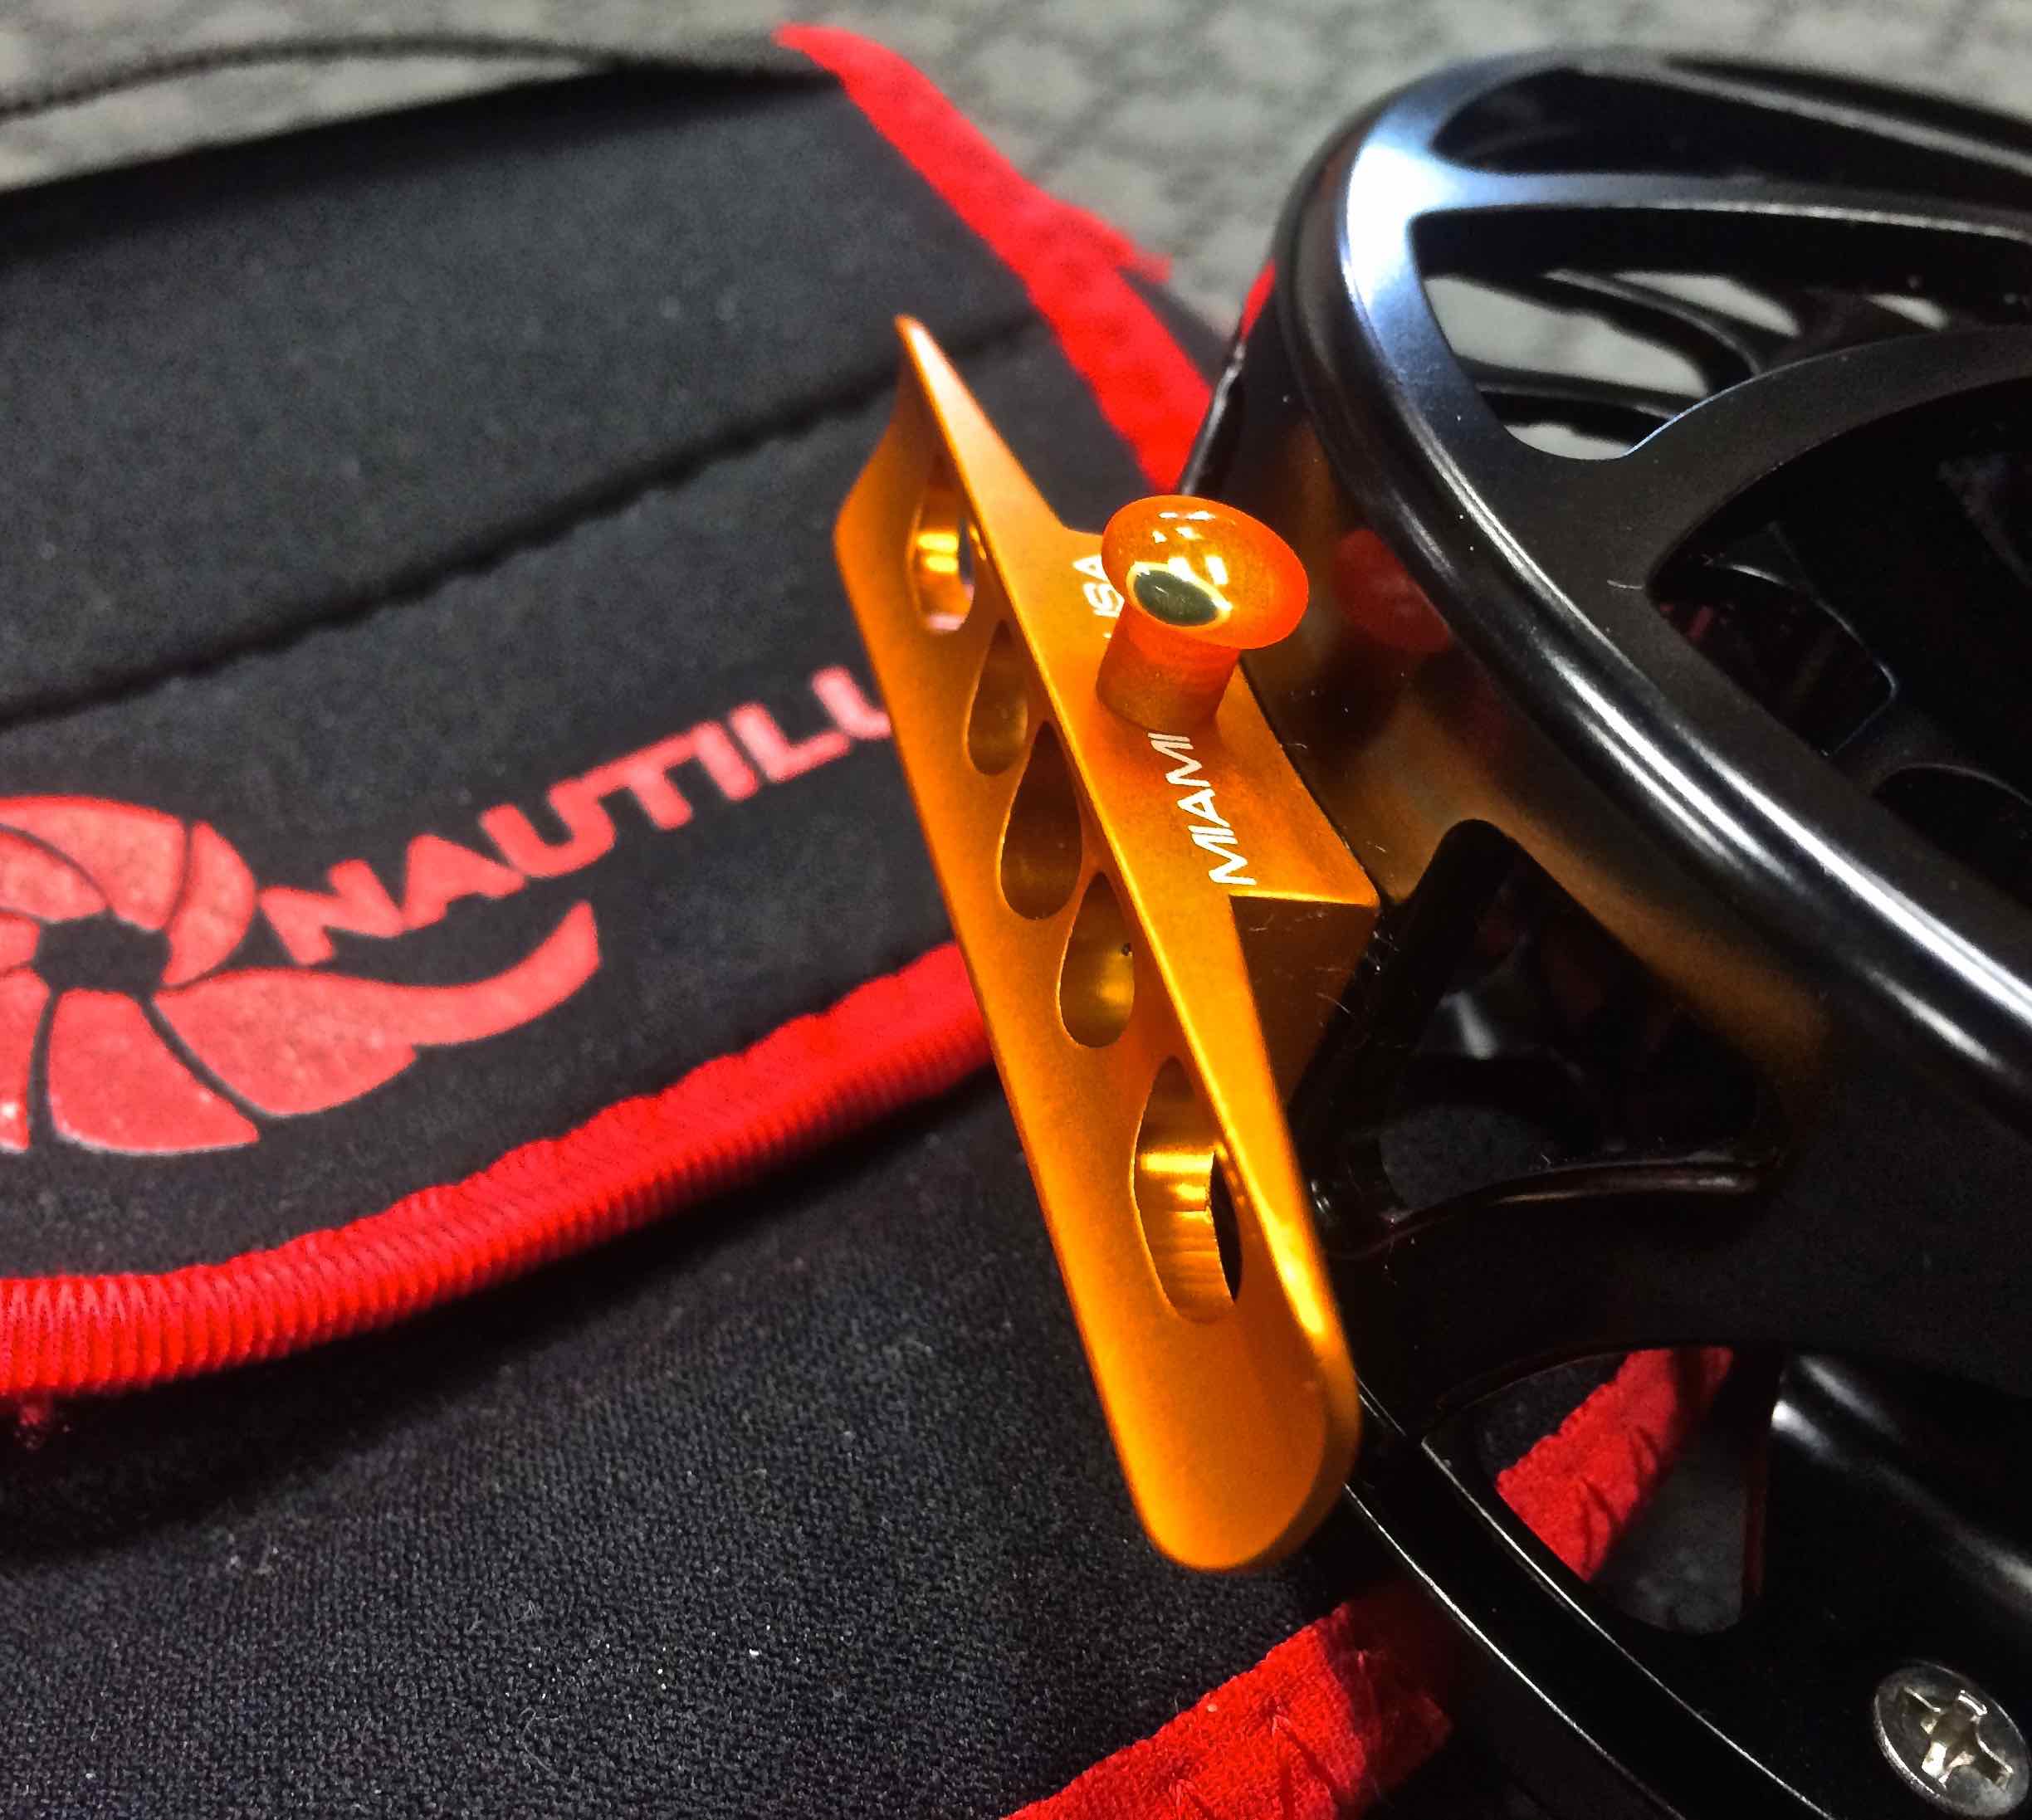 https://thefirstcast.ca/wp-content/uploads/2014/01/Nautilus-Fly-Reel-CCFX2-810-1012-Custom-Hook-Keeper-and-Handle-Replace-EE-Resized.jpg